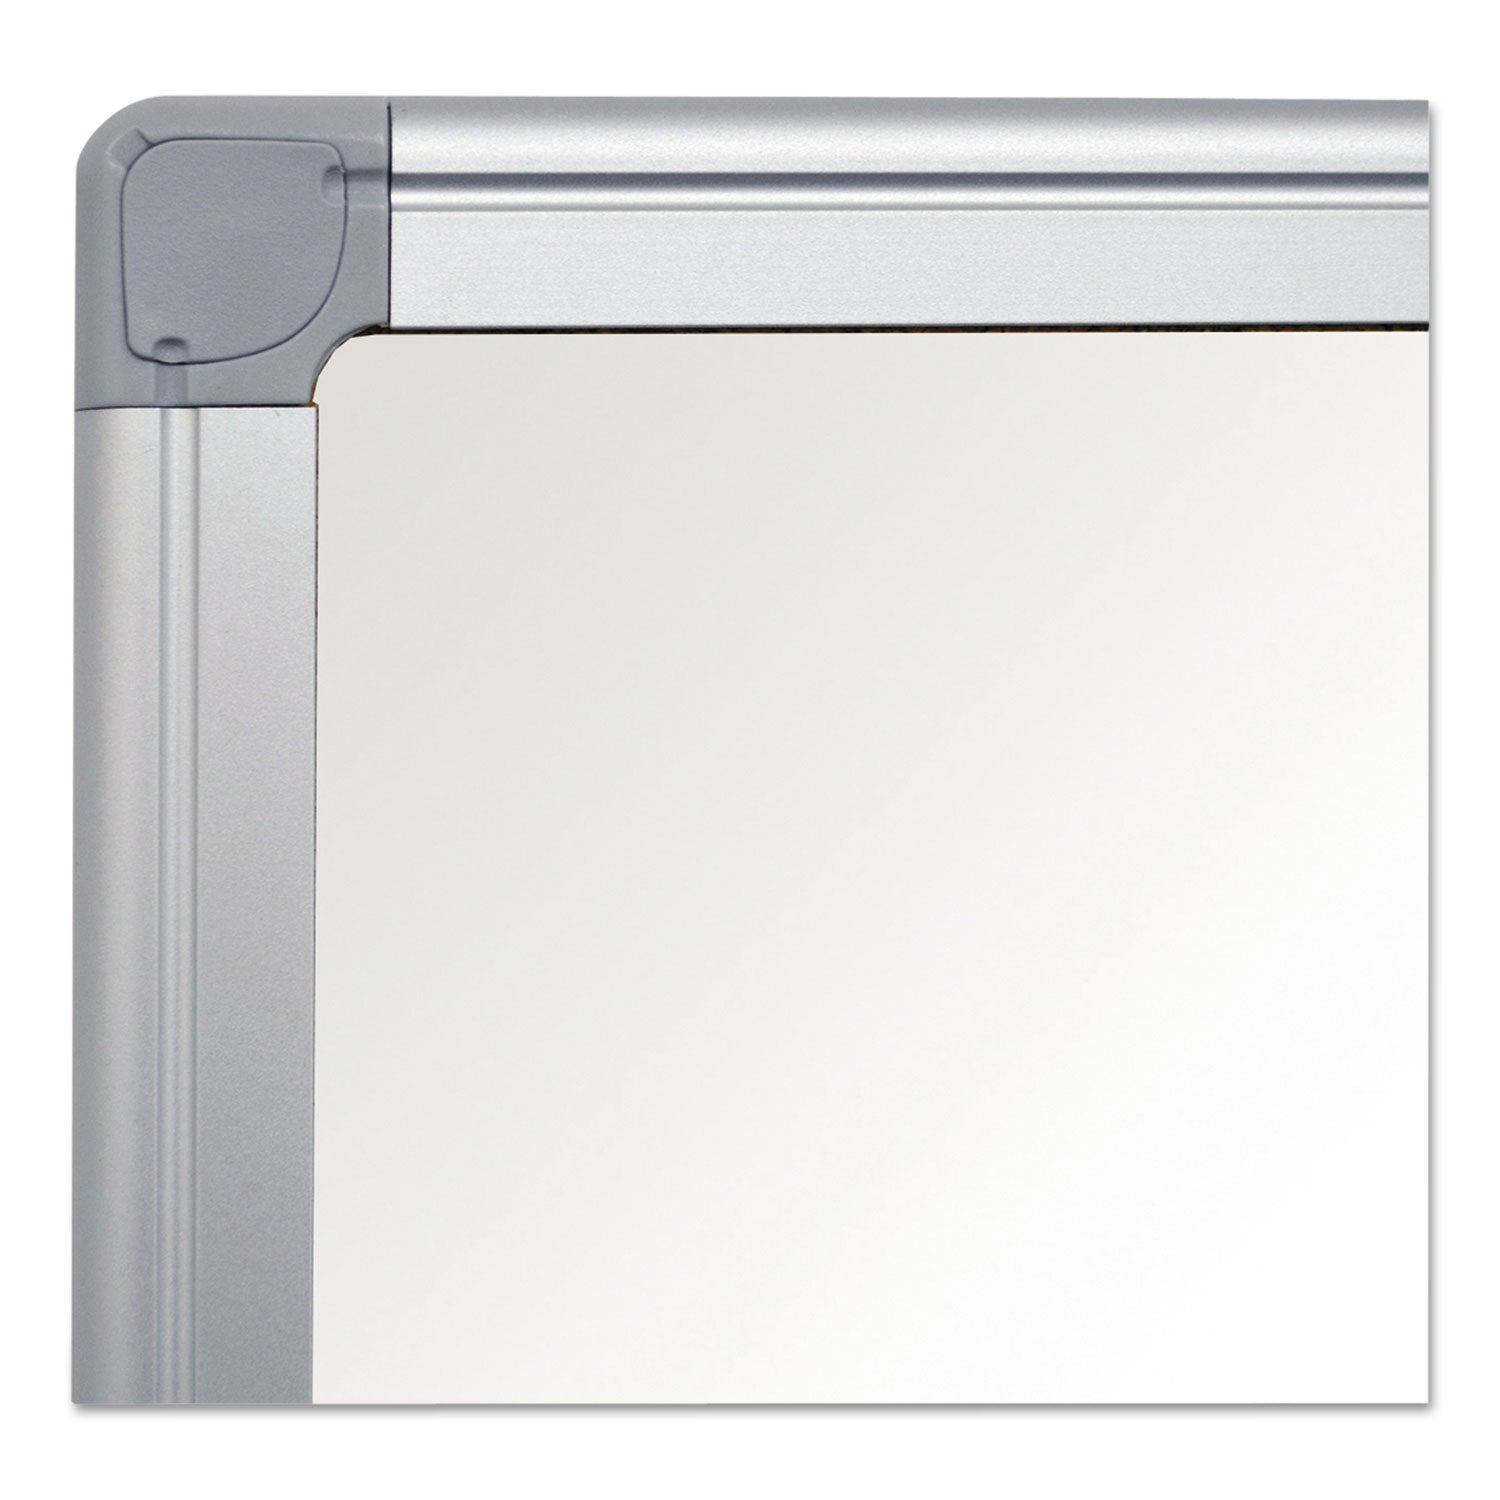 earth-silver-easy-clean-dry-erase-board-48-x-36-white-surface-silver-aluminum-frame_bvccr0820790 - 3